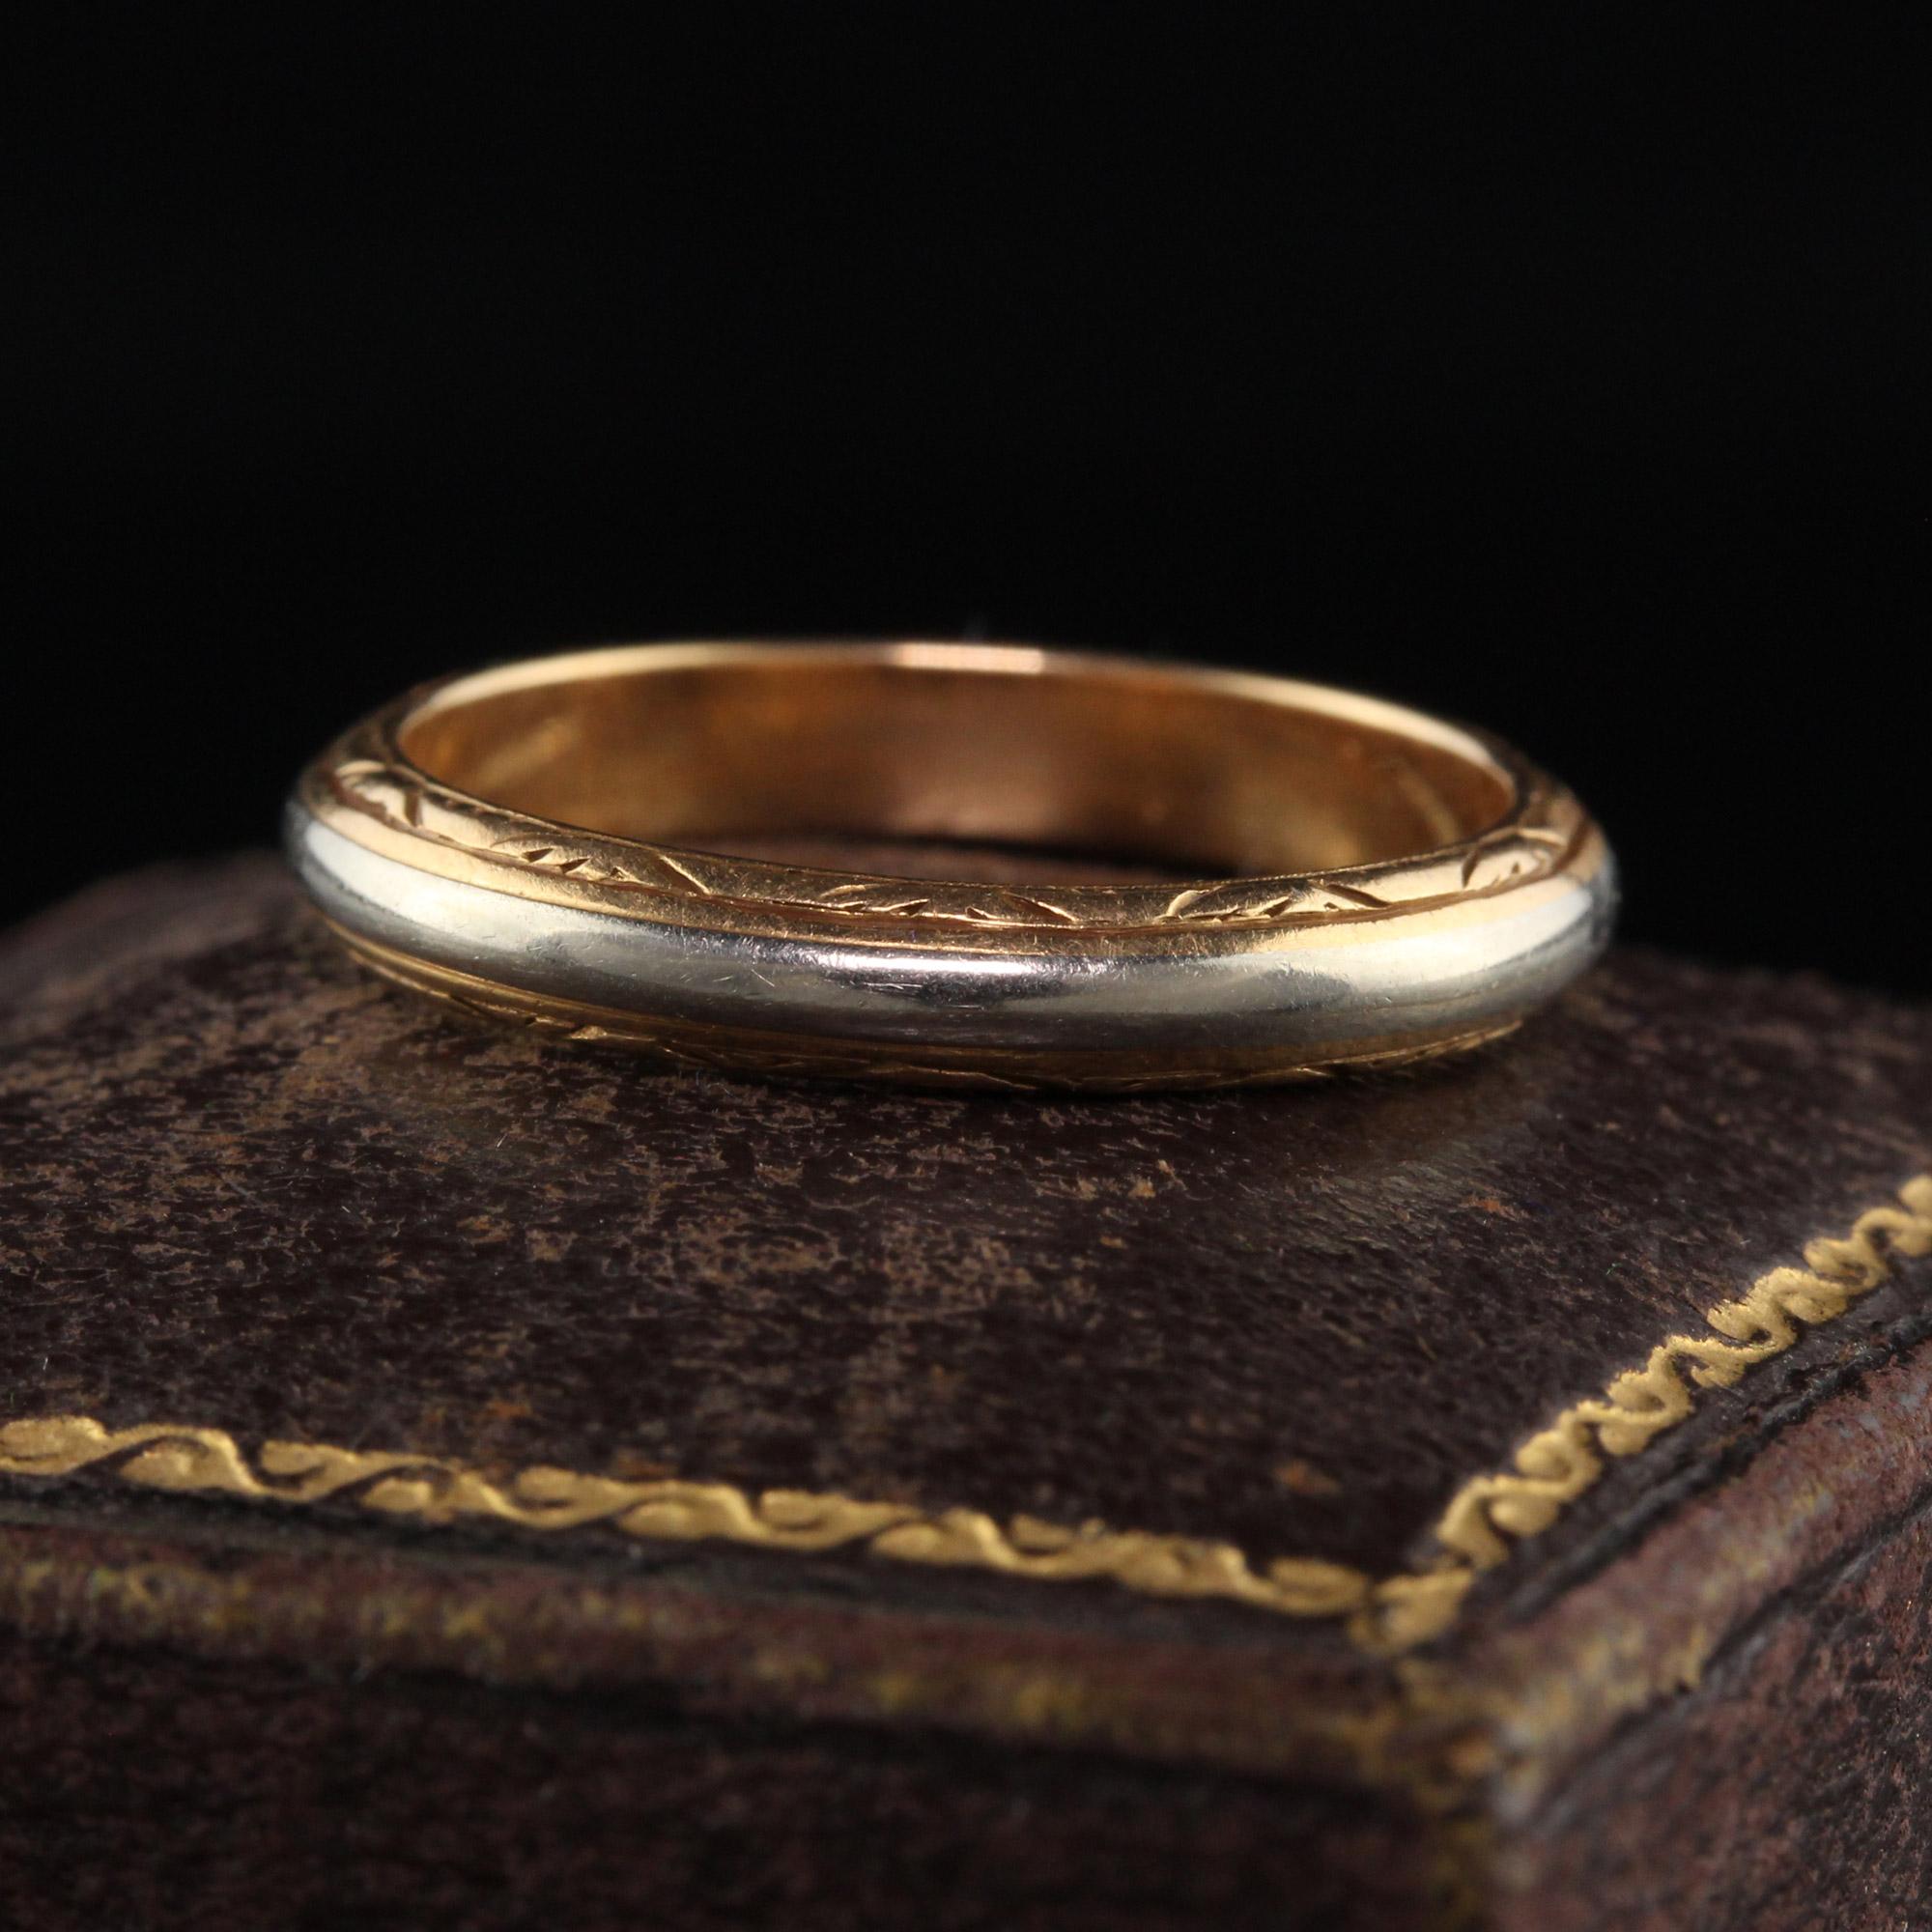 Beautiful Antique Art Deco 18K Yellow Gold and White Gold Engraved Wedding Band. This beautiful band is crafted in 18K yellow gold and white gold. It has a white gold band going through the middle of the ring and has gorgeous engravings on the sides